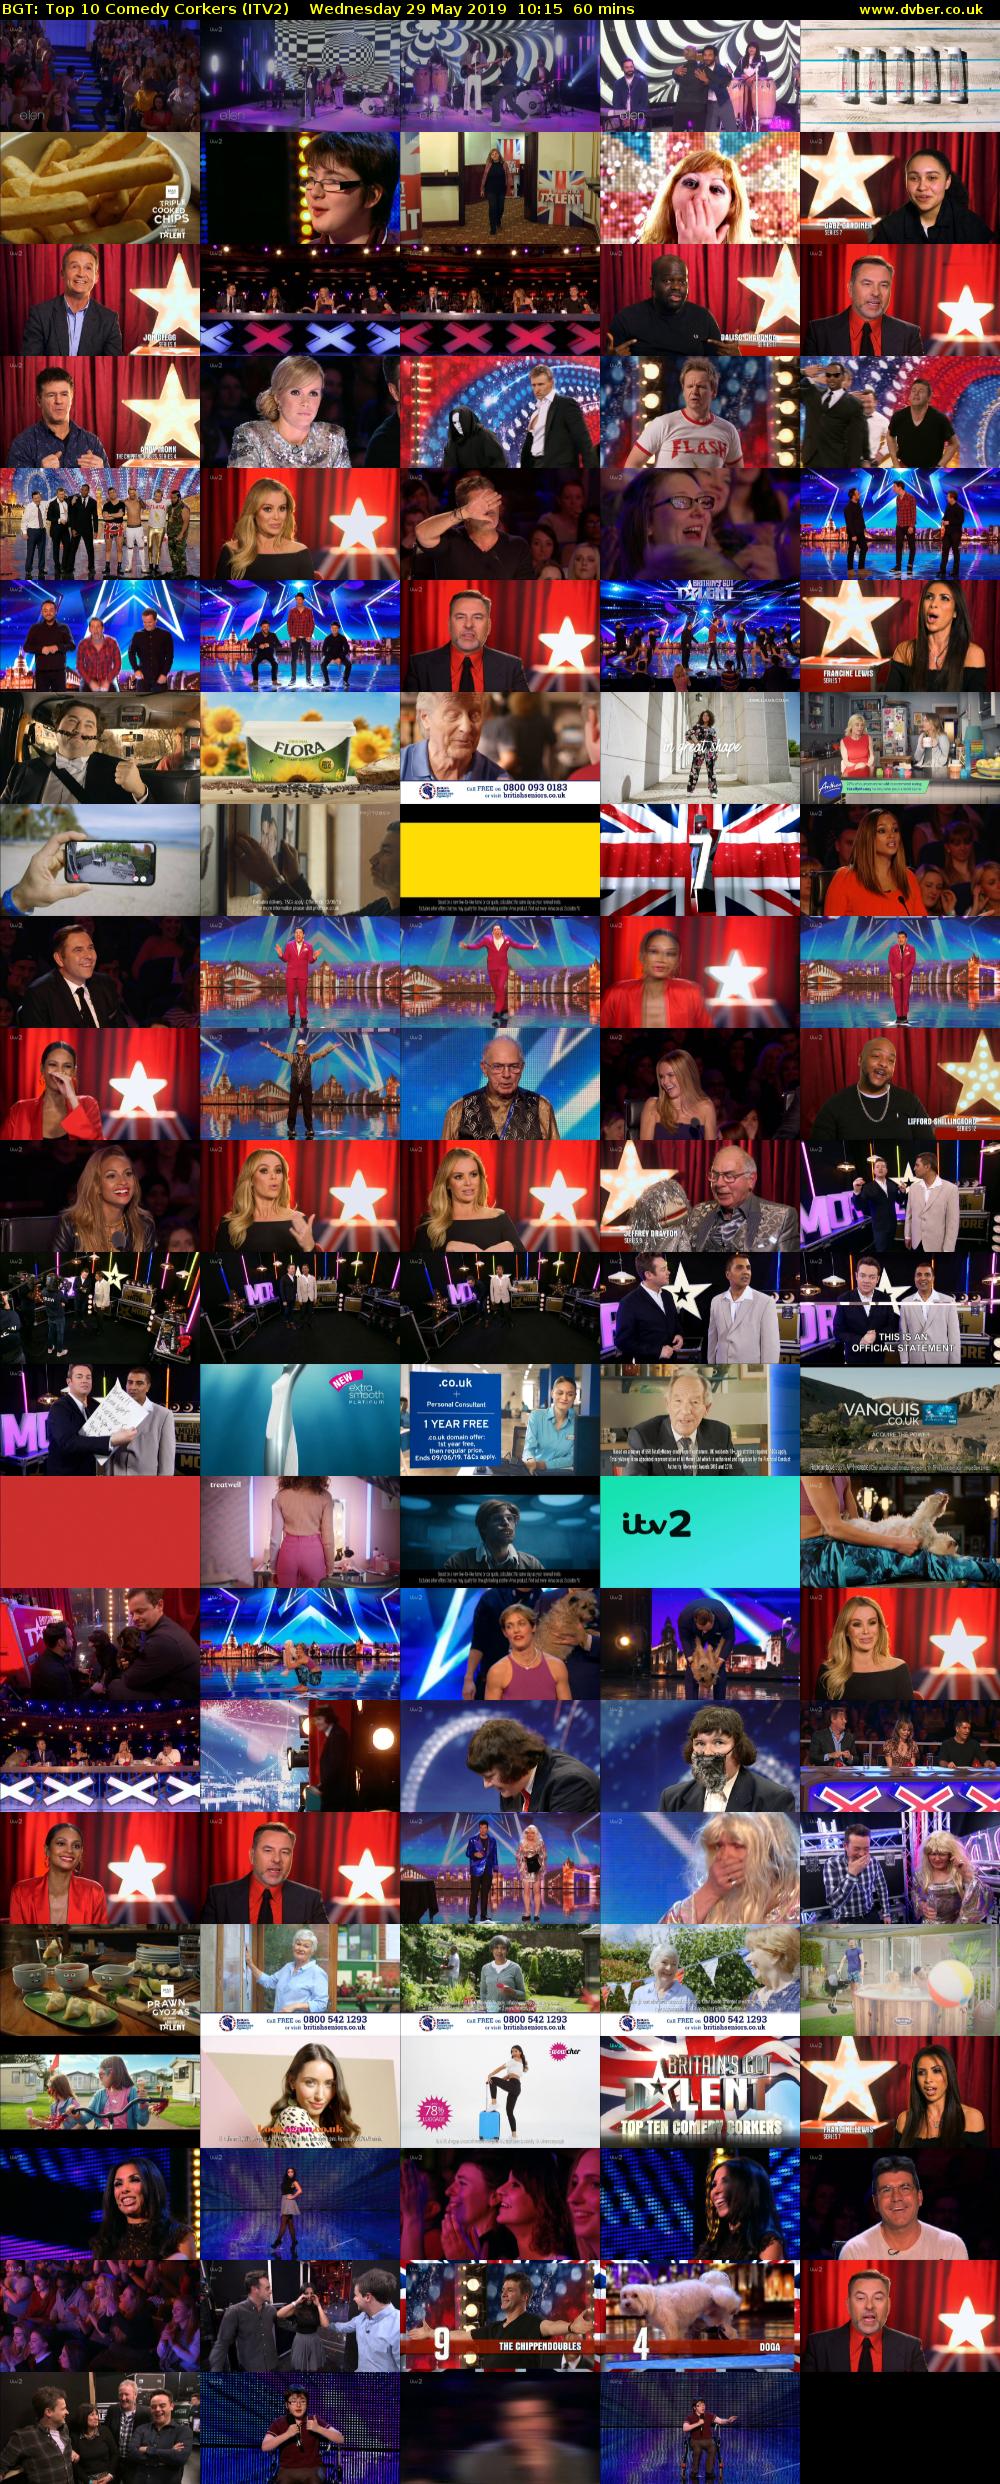 BGT: Top 10 Comedy Corkers (ITV2) Wednesday 29 May 2019 10:15 - 11:15